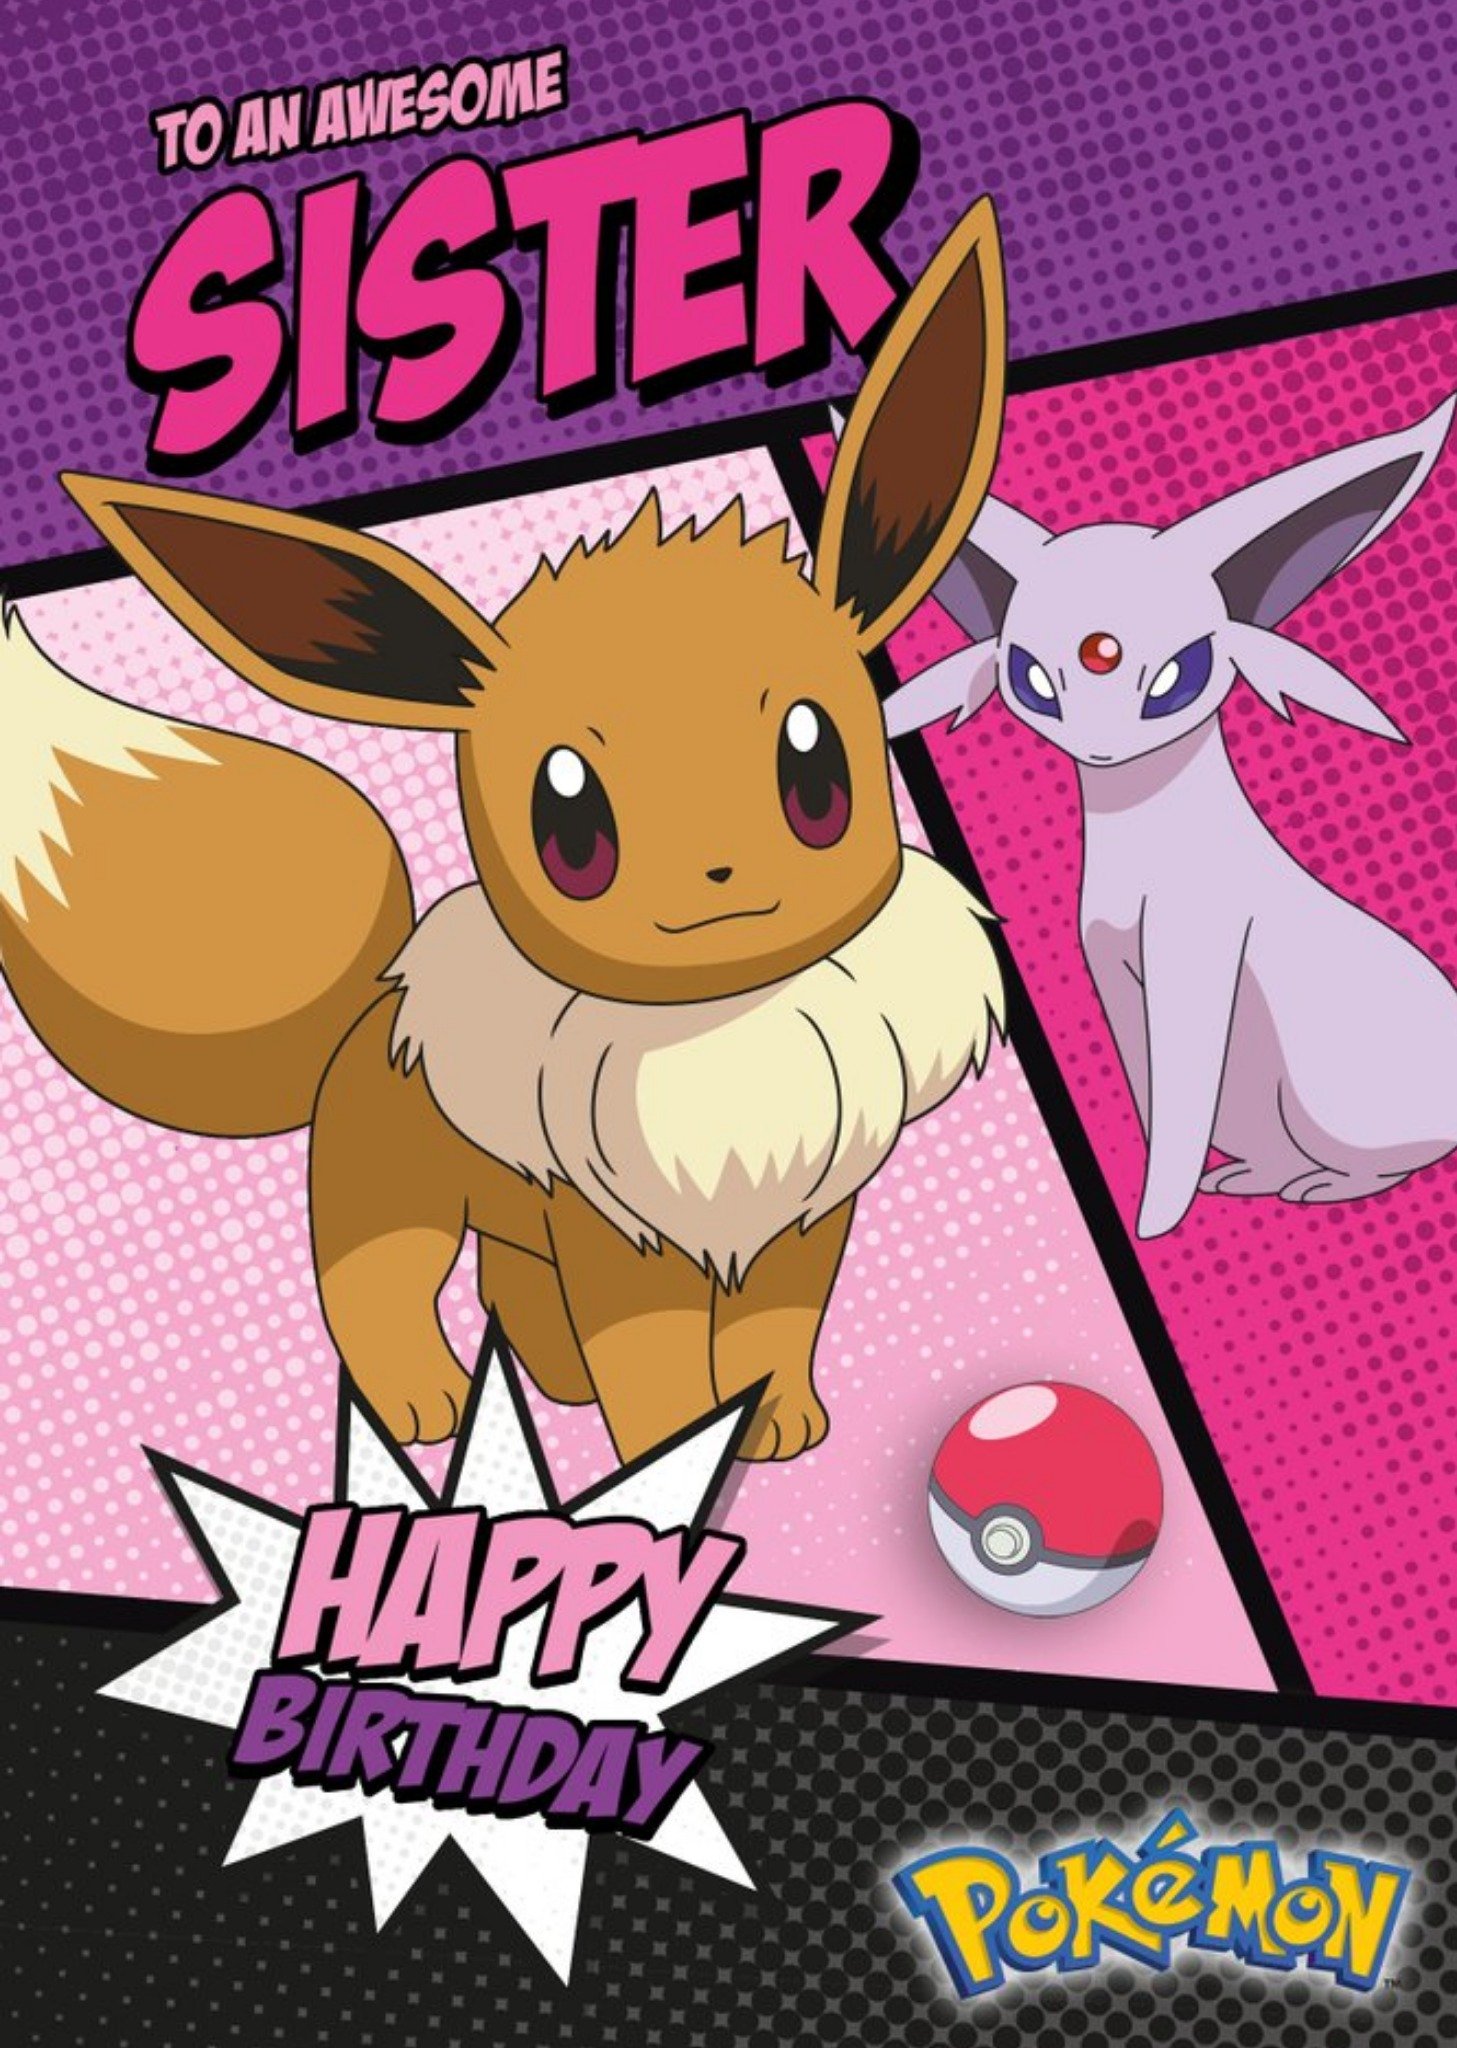 Pokemon Eevee And Espeon Awesome Sister Birthday Card, Large